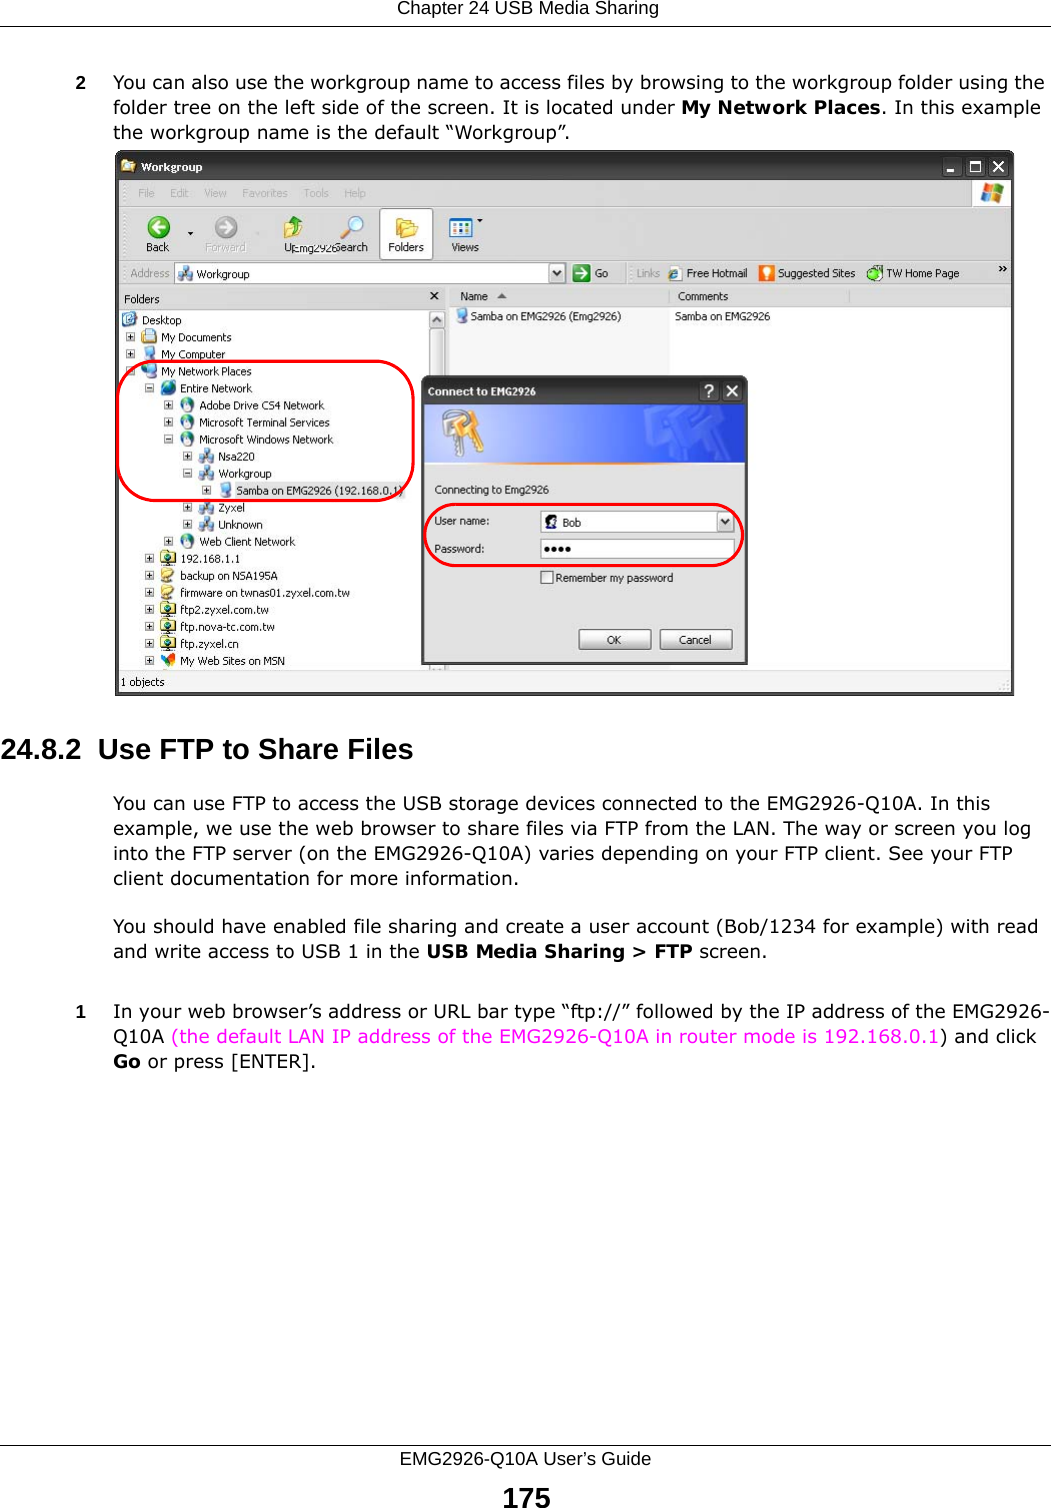  Chapter 24 USB Media SharingEMG2926-Q10A User’s Guide1752You can also use the workgroup name to access files by browsing to the workgroup folder using the folder tree on the left side of the screen. It is located under My Network Places. In this example the workgroup name is the default “Workgroup”. 24.8.2  Use FTP to Share FilesYou can use FTP to access the USB storage devices connected to the EMG2926-Q10A. In this example, we use the web browser to share files via FTP from the LAN. The way or screen you log into the FTP server (on the EMG2926-Q10A) varies depending on your FTP client. See your FTP client documentation for more information. You should have enabled file sharing and create a user account (Bob/1234 for example) with read and write access to USB 1 in the USB Media Sharing &gt; FTP screen.1In your web browser’s address or URL bar type “ftp://” followed by the IP address of the EMG2926-Q10A (the default LAN IP address of the EMG2926-Q10A in router mode is 192.168.0.1) and click Go or press [ENTER].